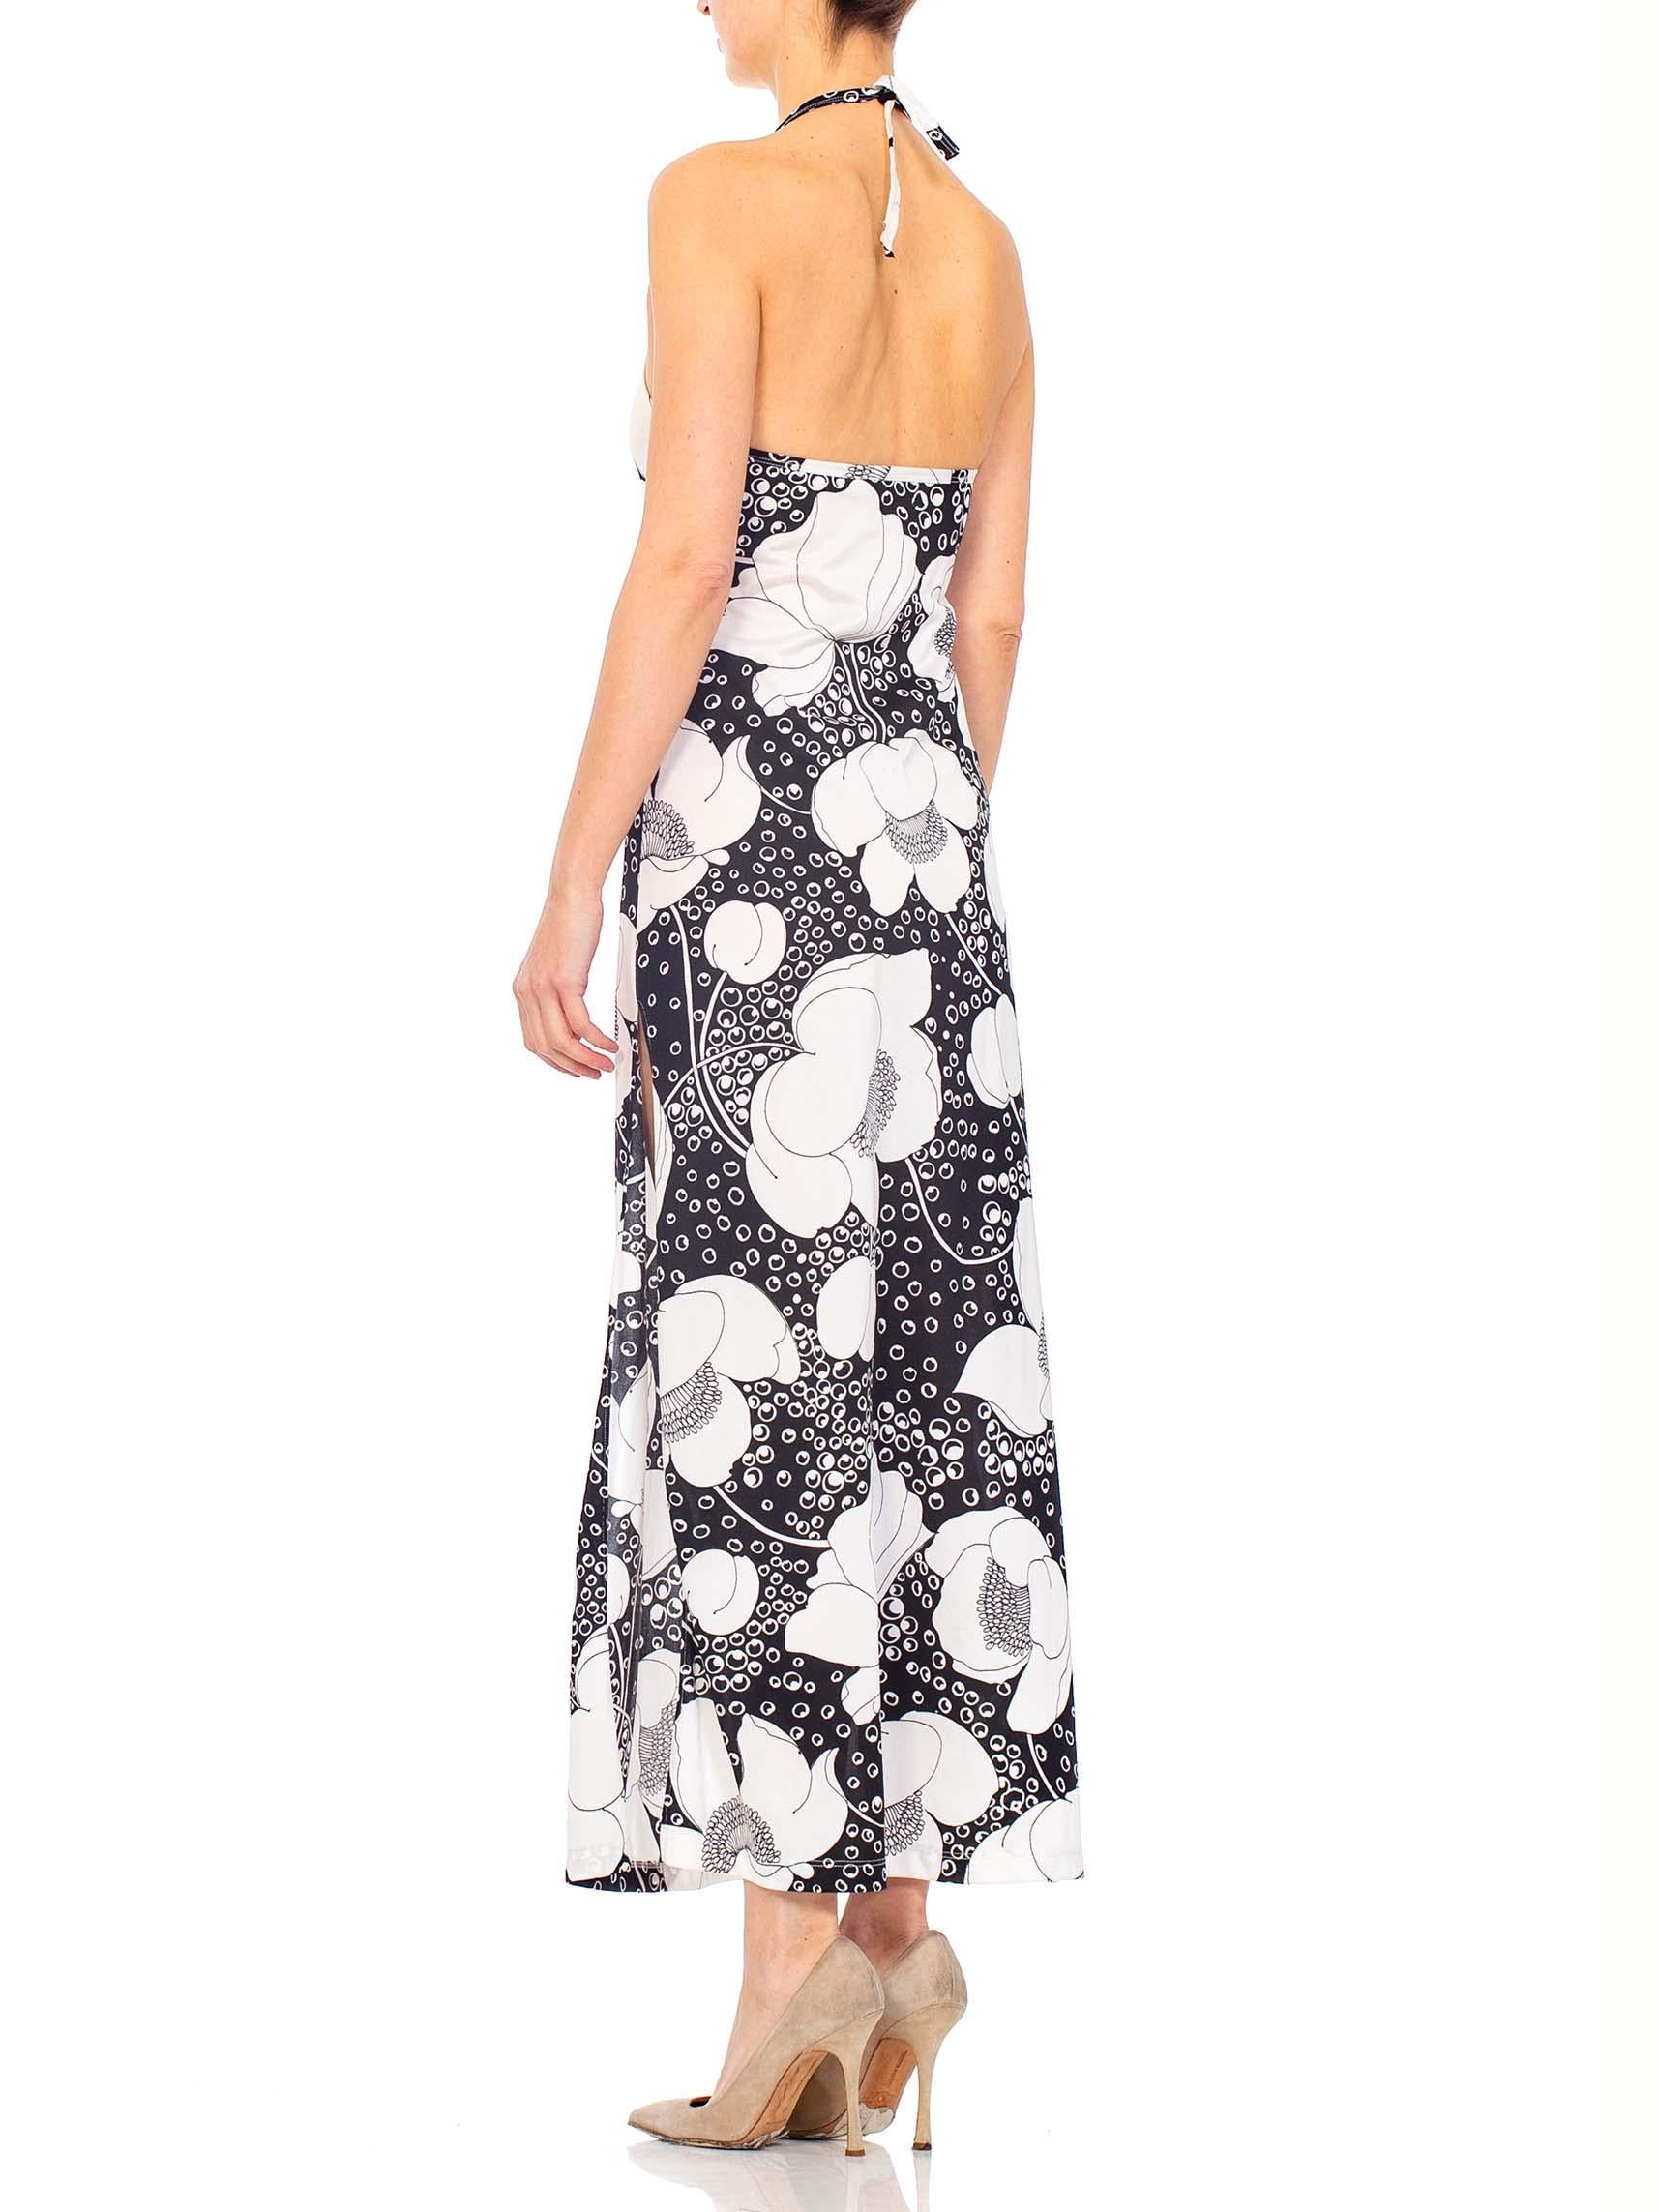 Women's 1970'S Black & White Polyester Jersey Floral Print Backless Halter Dress With S